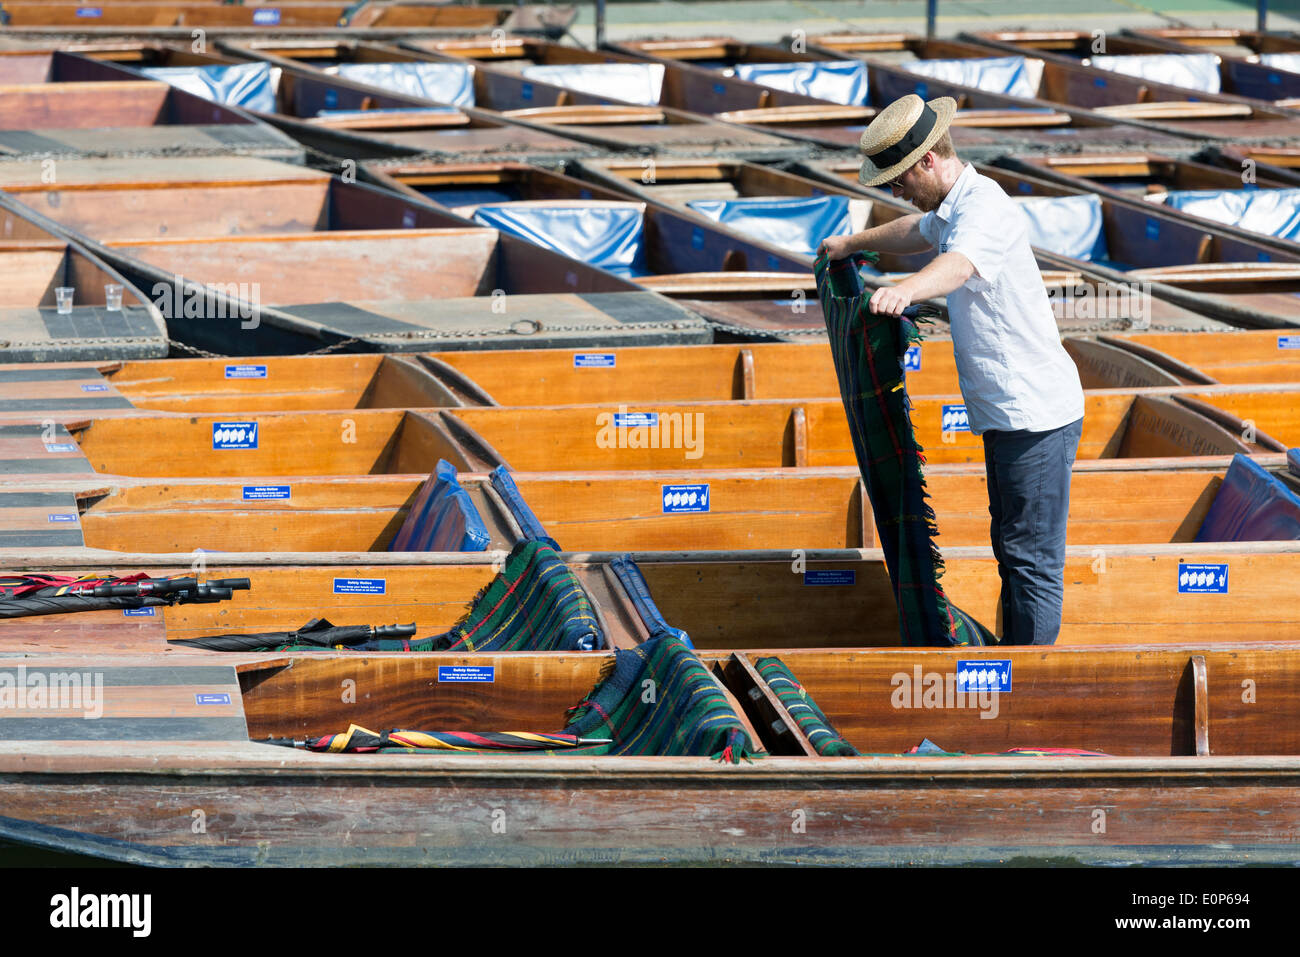 Cambridge UK , 18th May 2014. Staff at Scudamore's Boatyard prepare the punts for a busy Sunday punting on the River Cam, Cambridge UK as another warm sunny day is forecast.  The temperature is expected to reach 24 degrees centigrade.  Many tourists will take chauffeured punt trips along the river enjoying the sights of the historic University buildings.  Credit Julian Eales/Alamy Live News Stock Photo